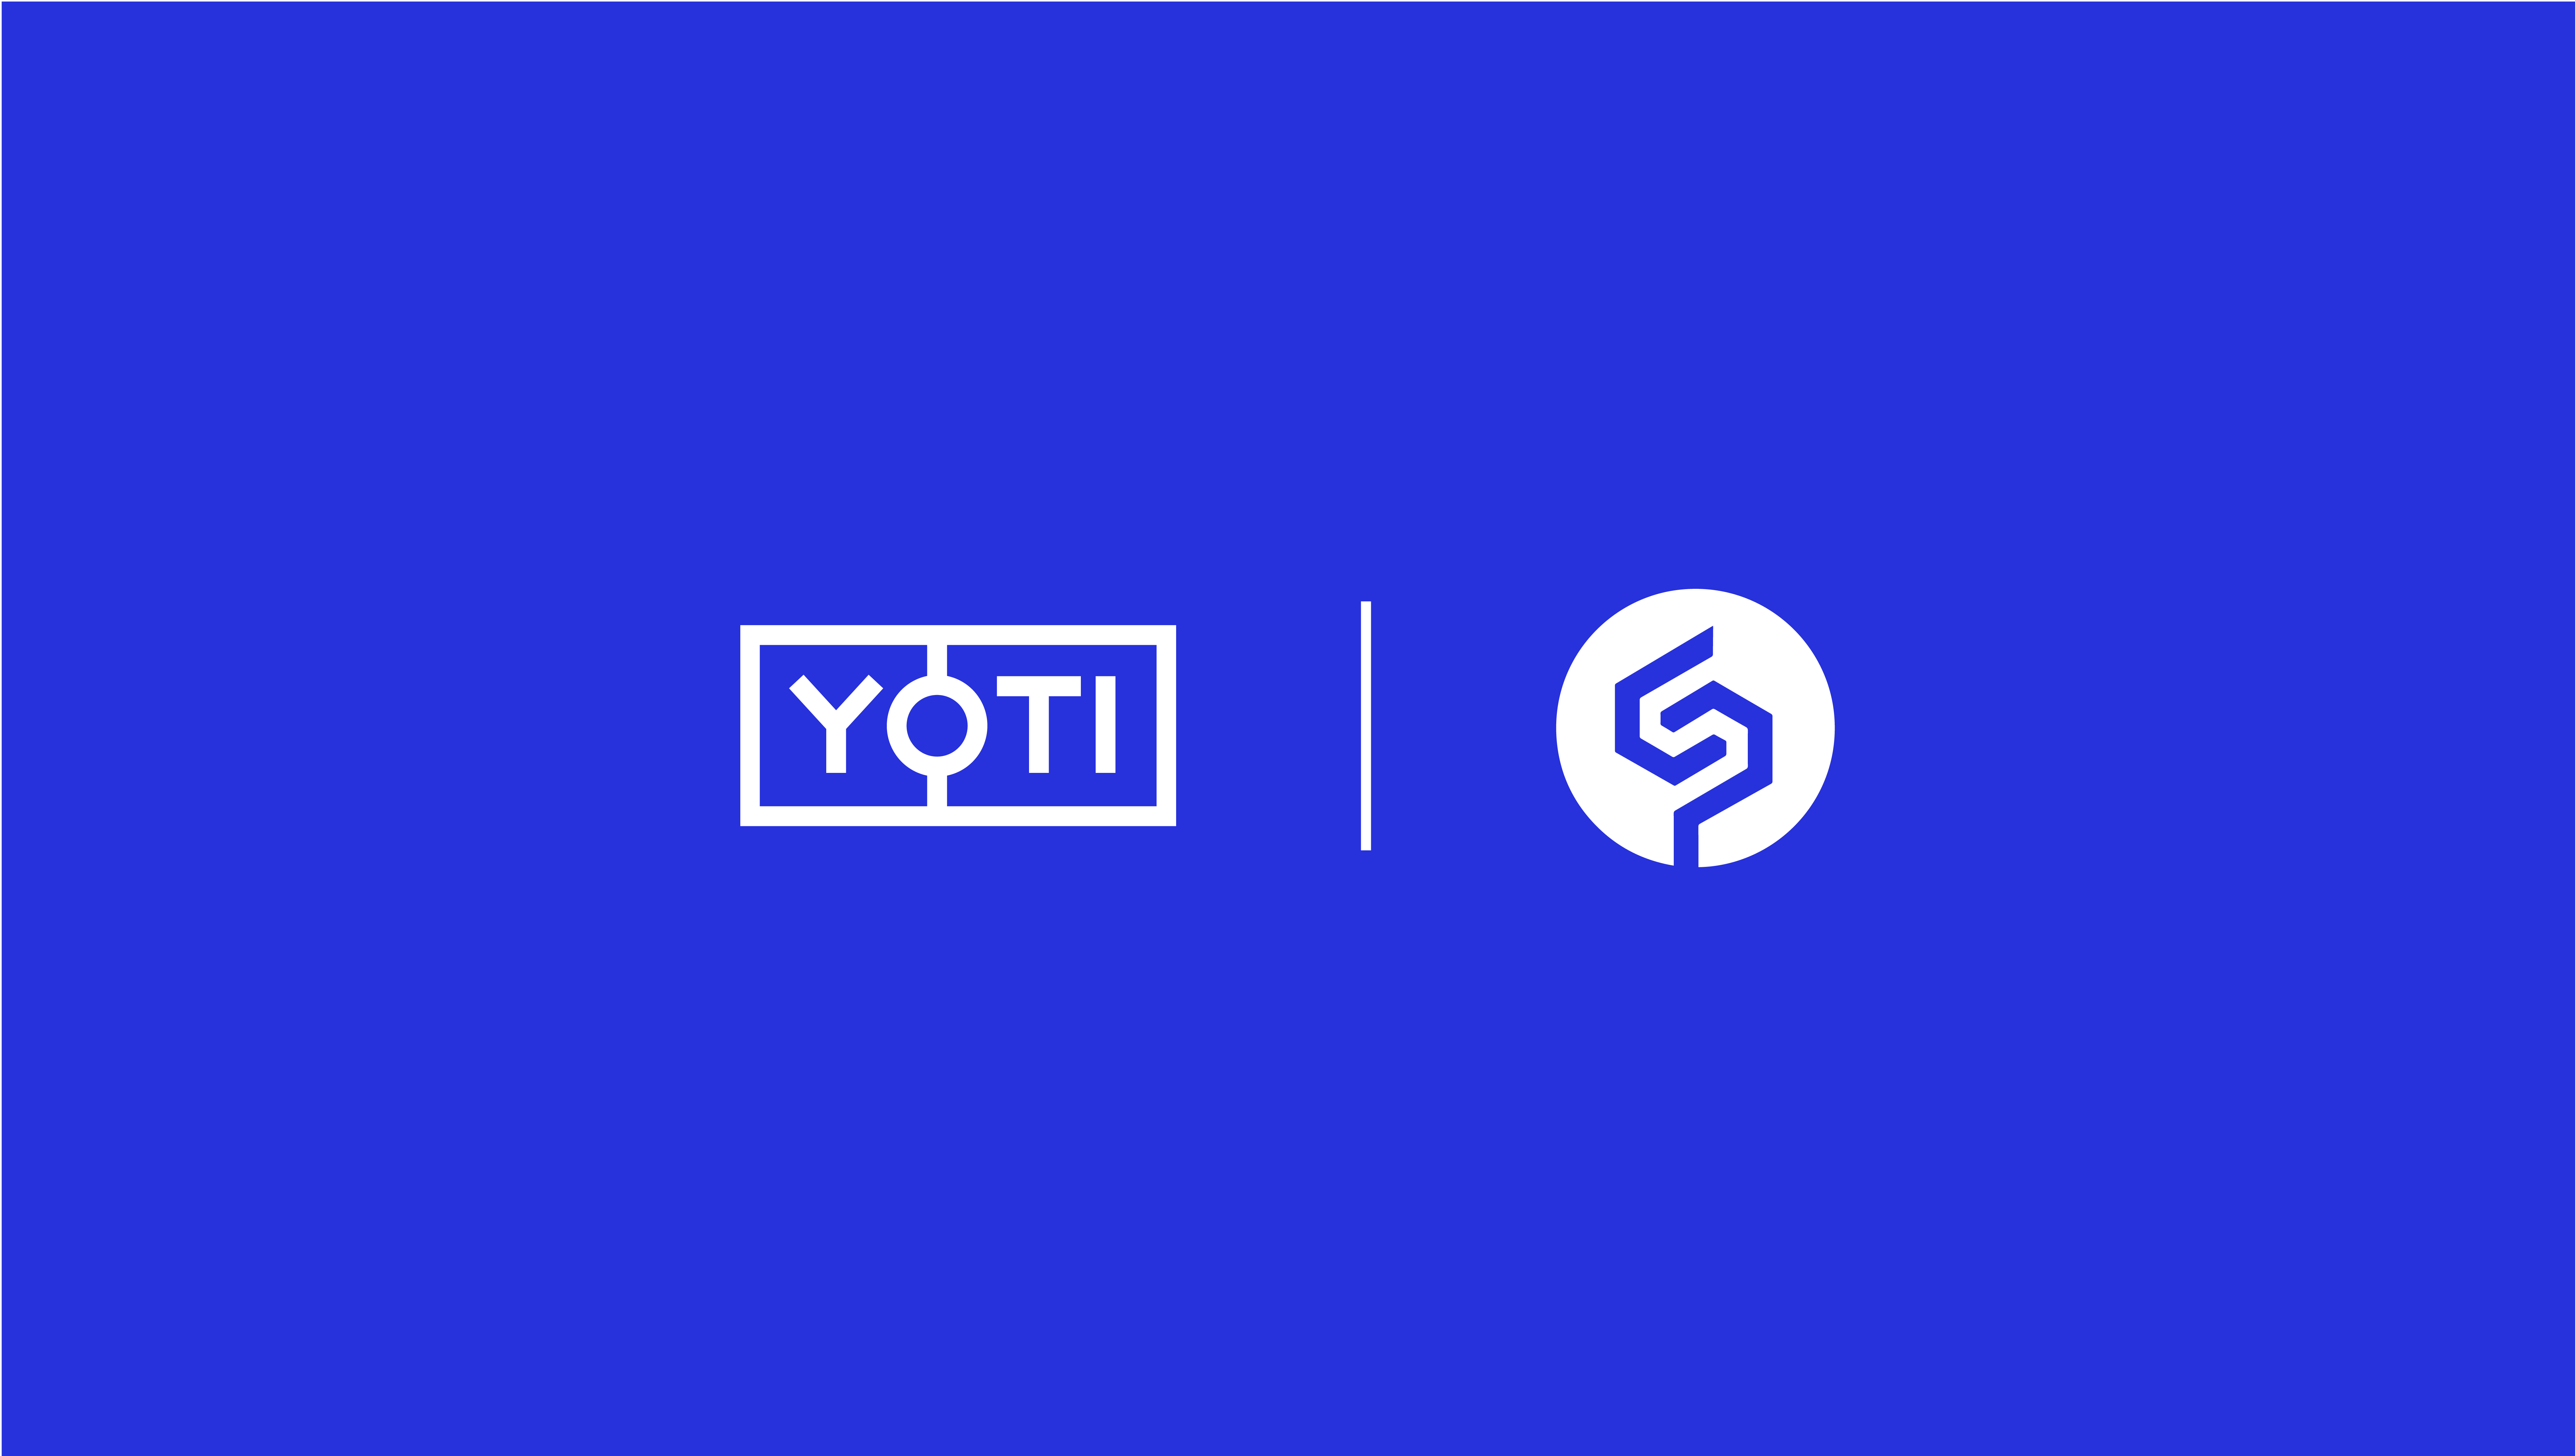 Yoti and Strongpoint logos presented together